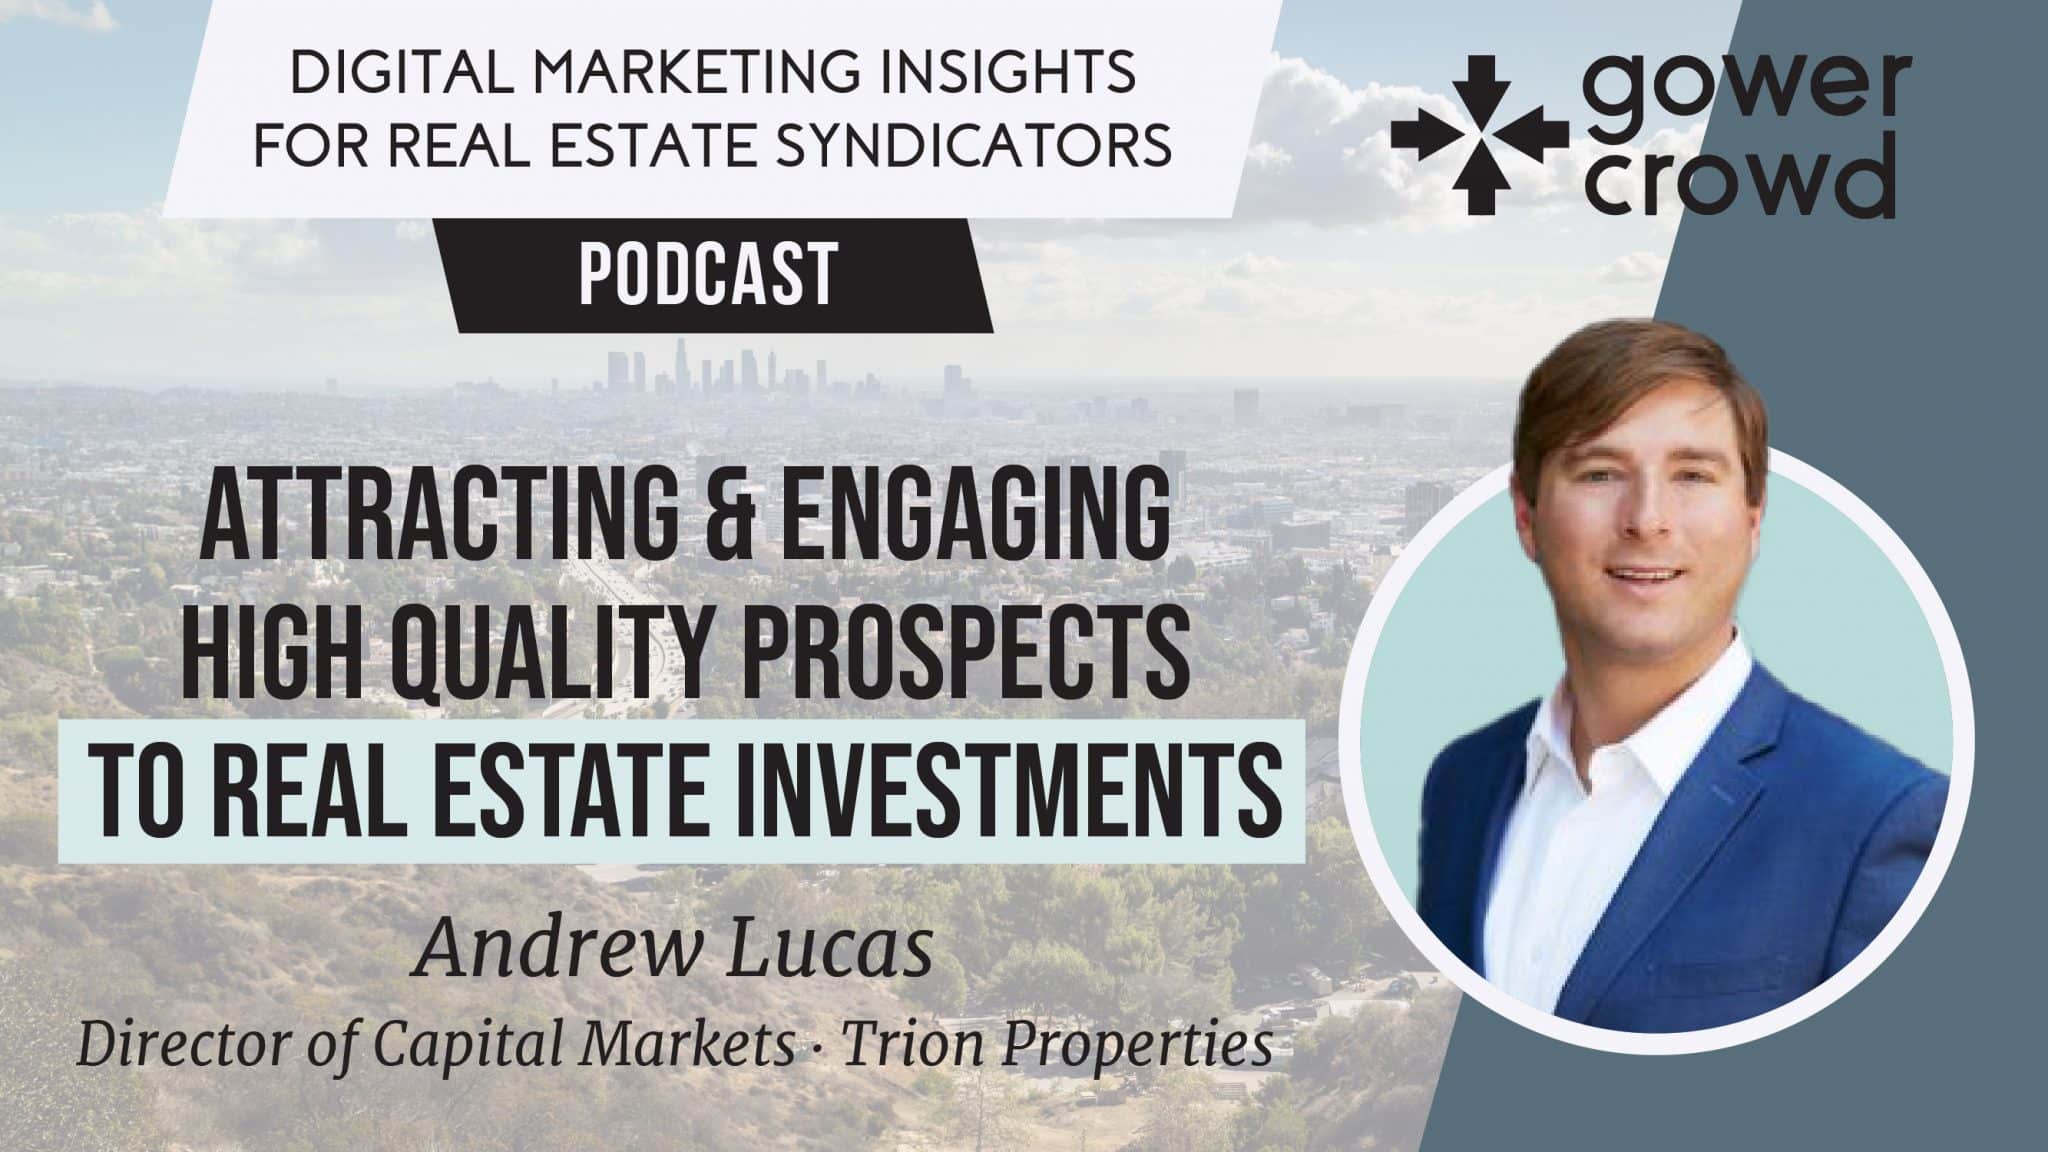 Podcast 379 Andrew Lucas, Director of Capital Markets at Trion Properties